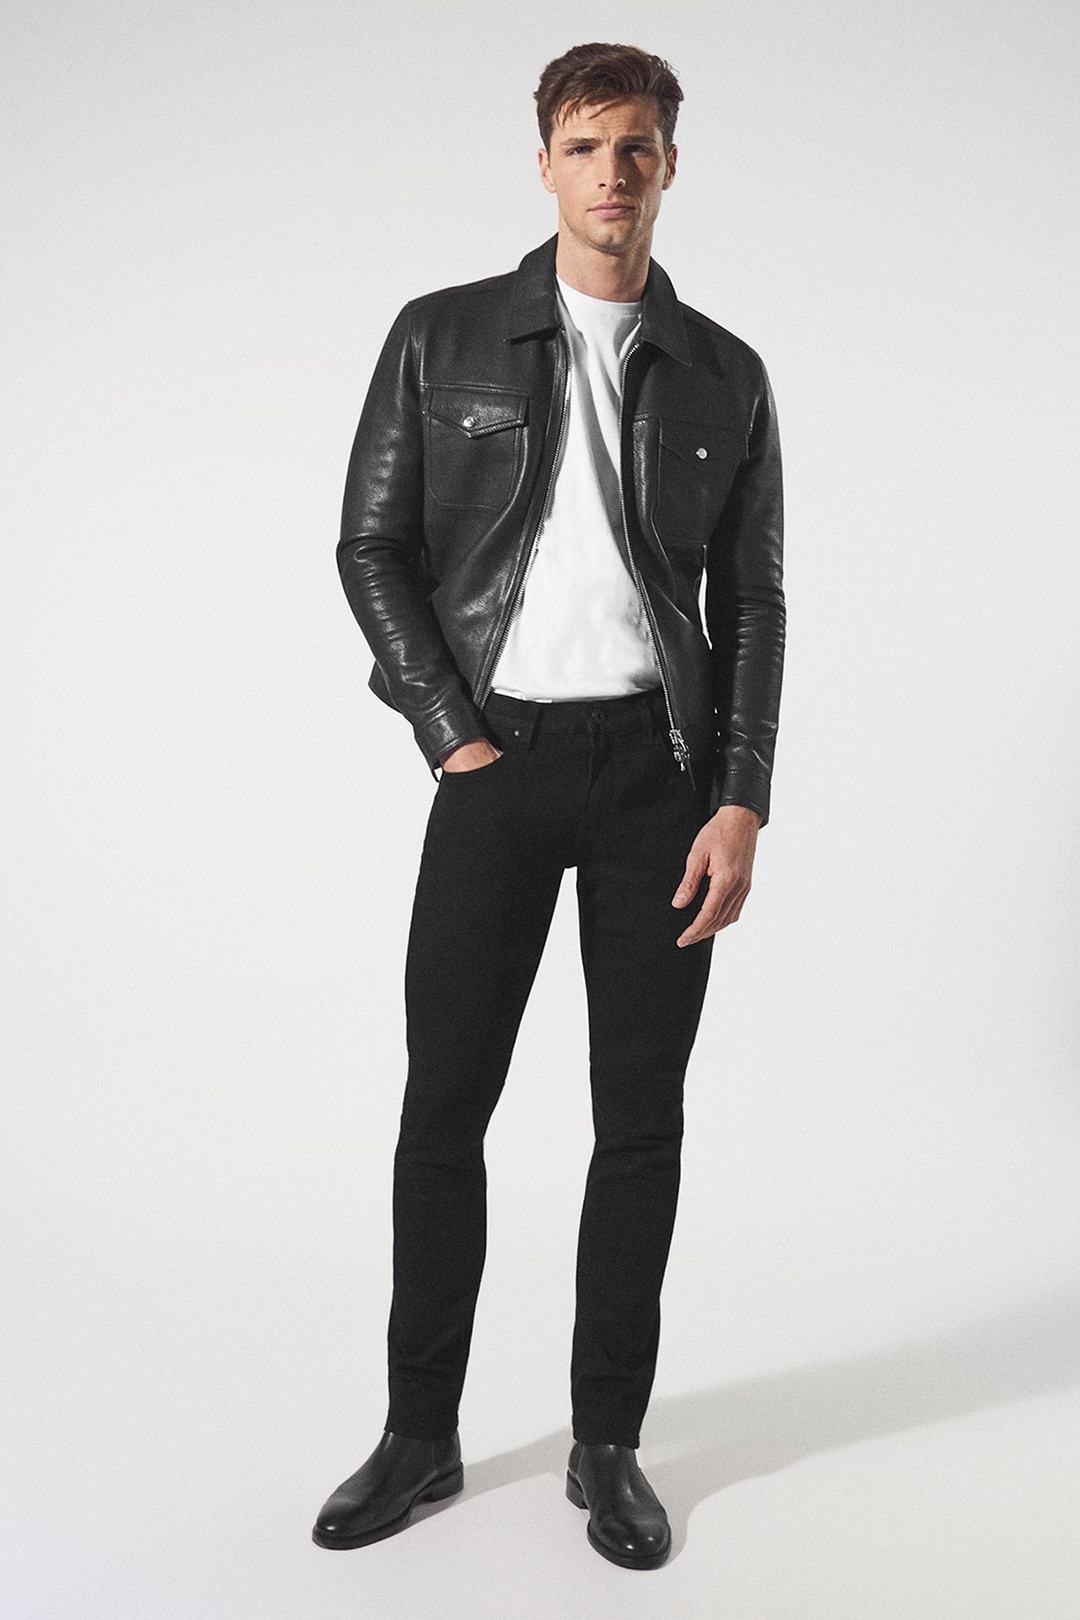 Black leather trucker jacket, white t-shirt, black skinny jeans, and black Chelsea boots outfit